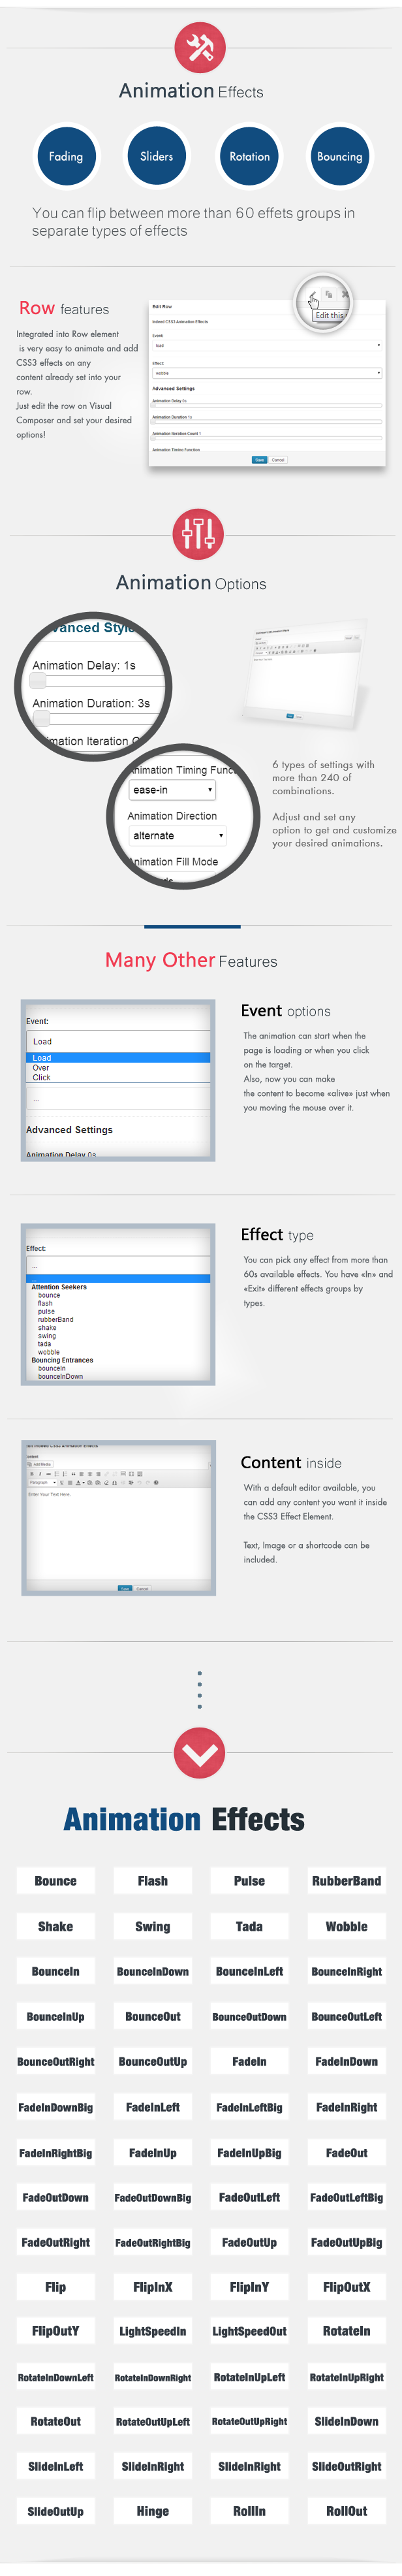 Animation CSS3 Effects - WPBakery Page Builder WordPress - 5